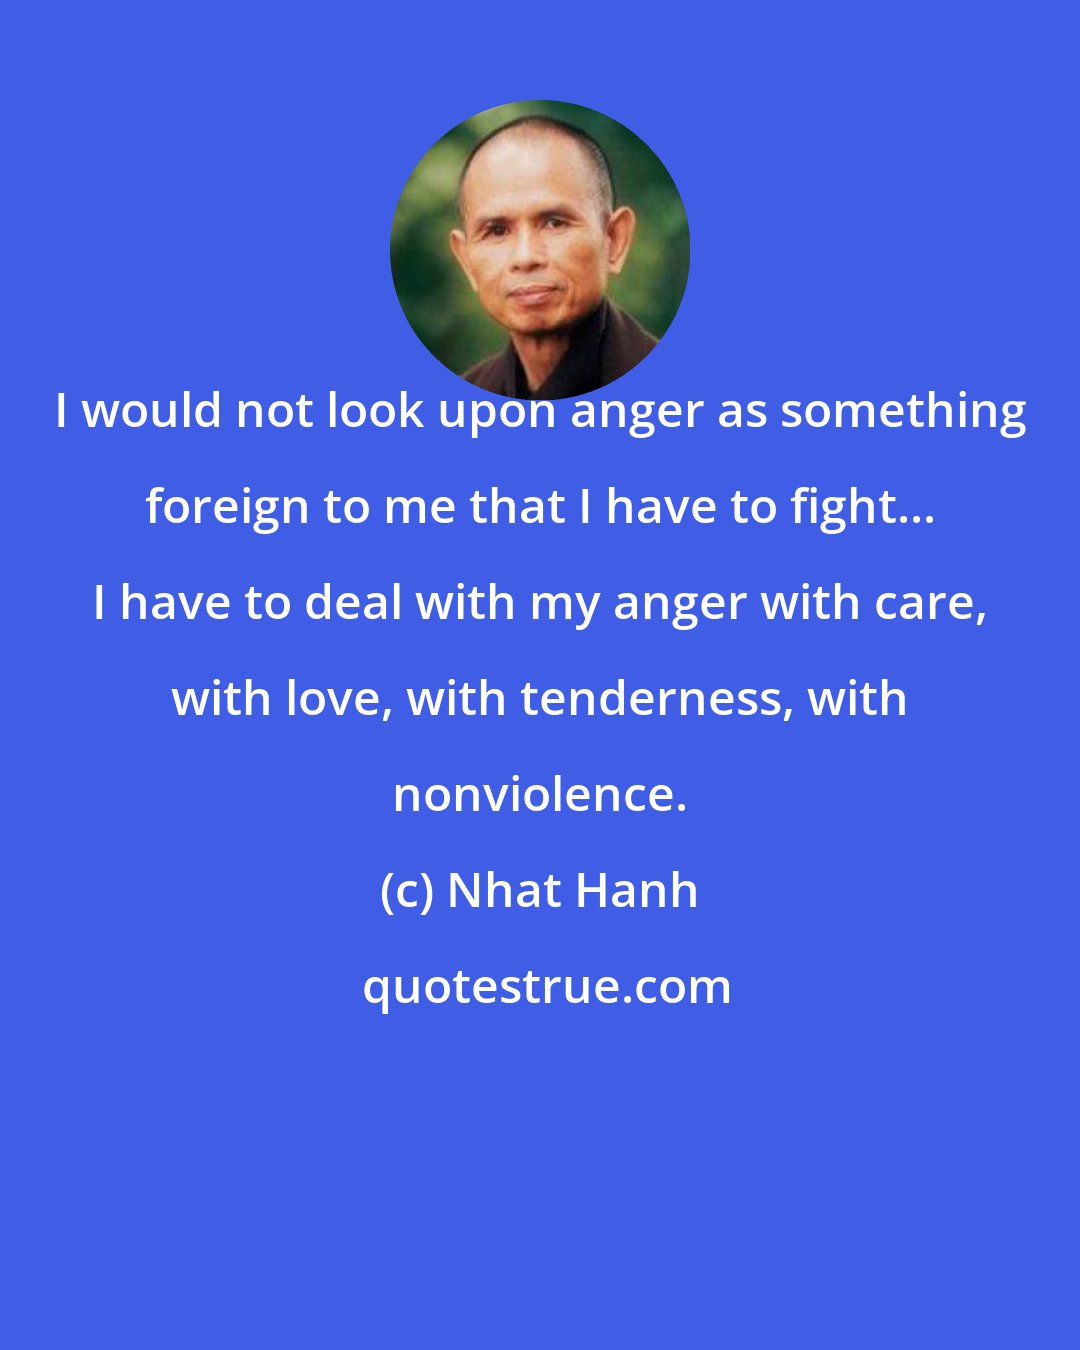 Nhat Hanh: I would not look upon anger as something foreign to me that I have to fight... I have to deal with my anger with care, with love, with tenderness, with nonviolence.